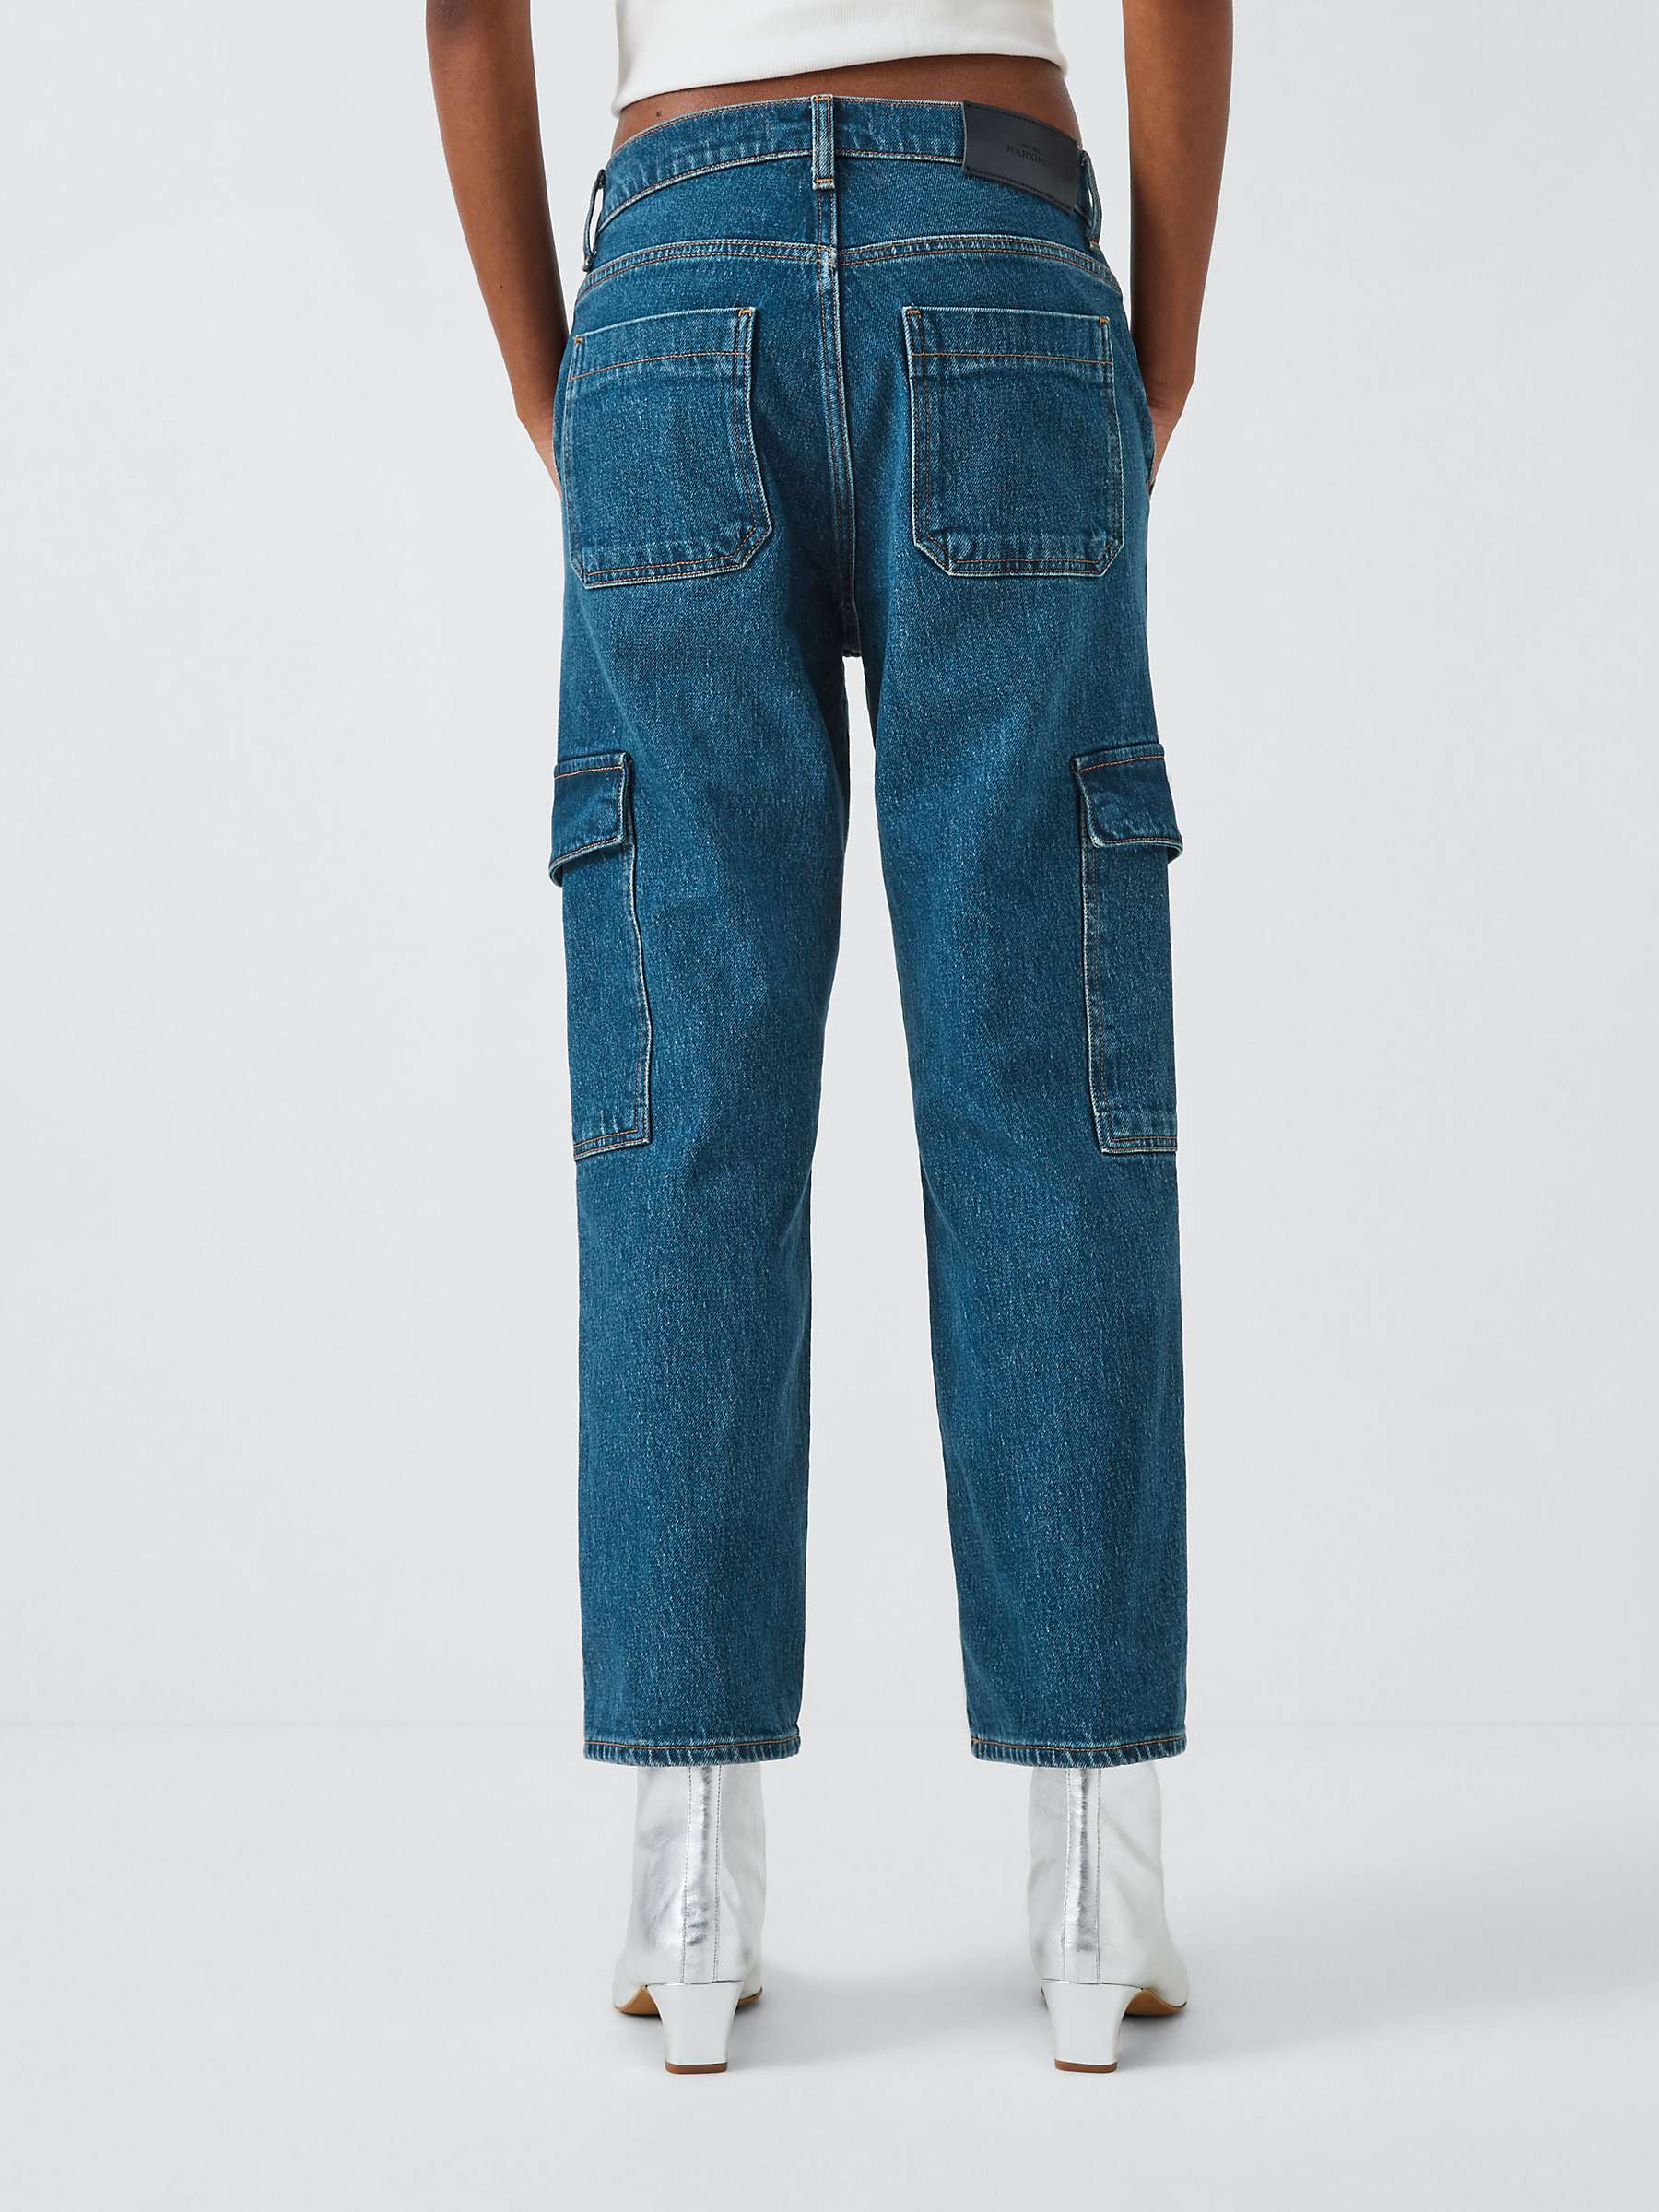 Buy 7 For All Mankind Cargo Logan High Waist Straight Cropped Jeans, Blue Bell Online at johnlewis.com